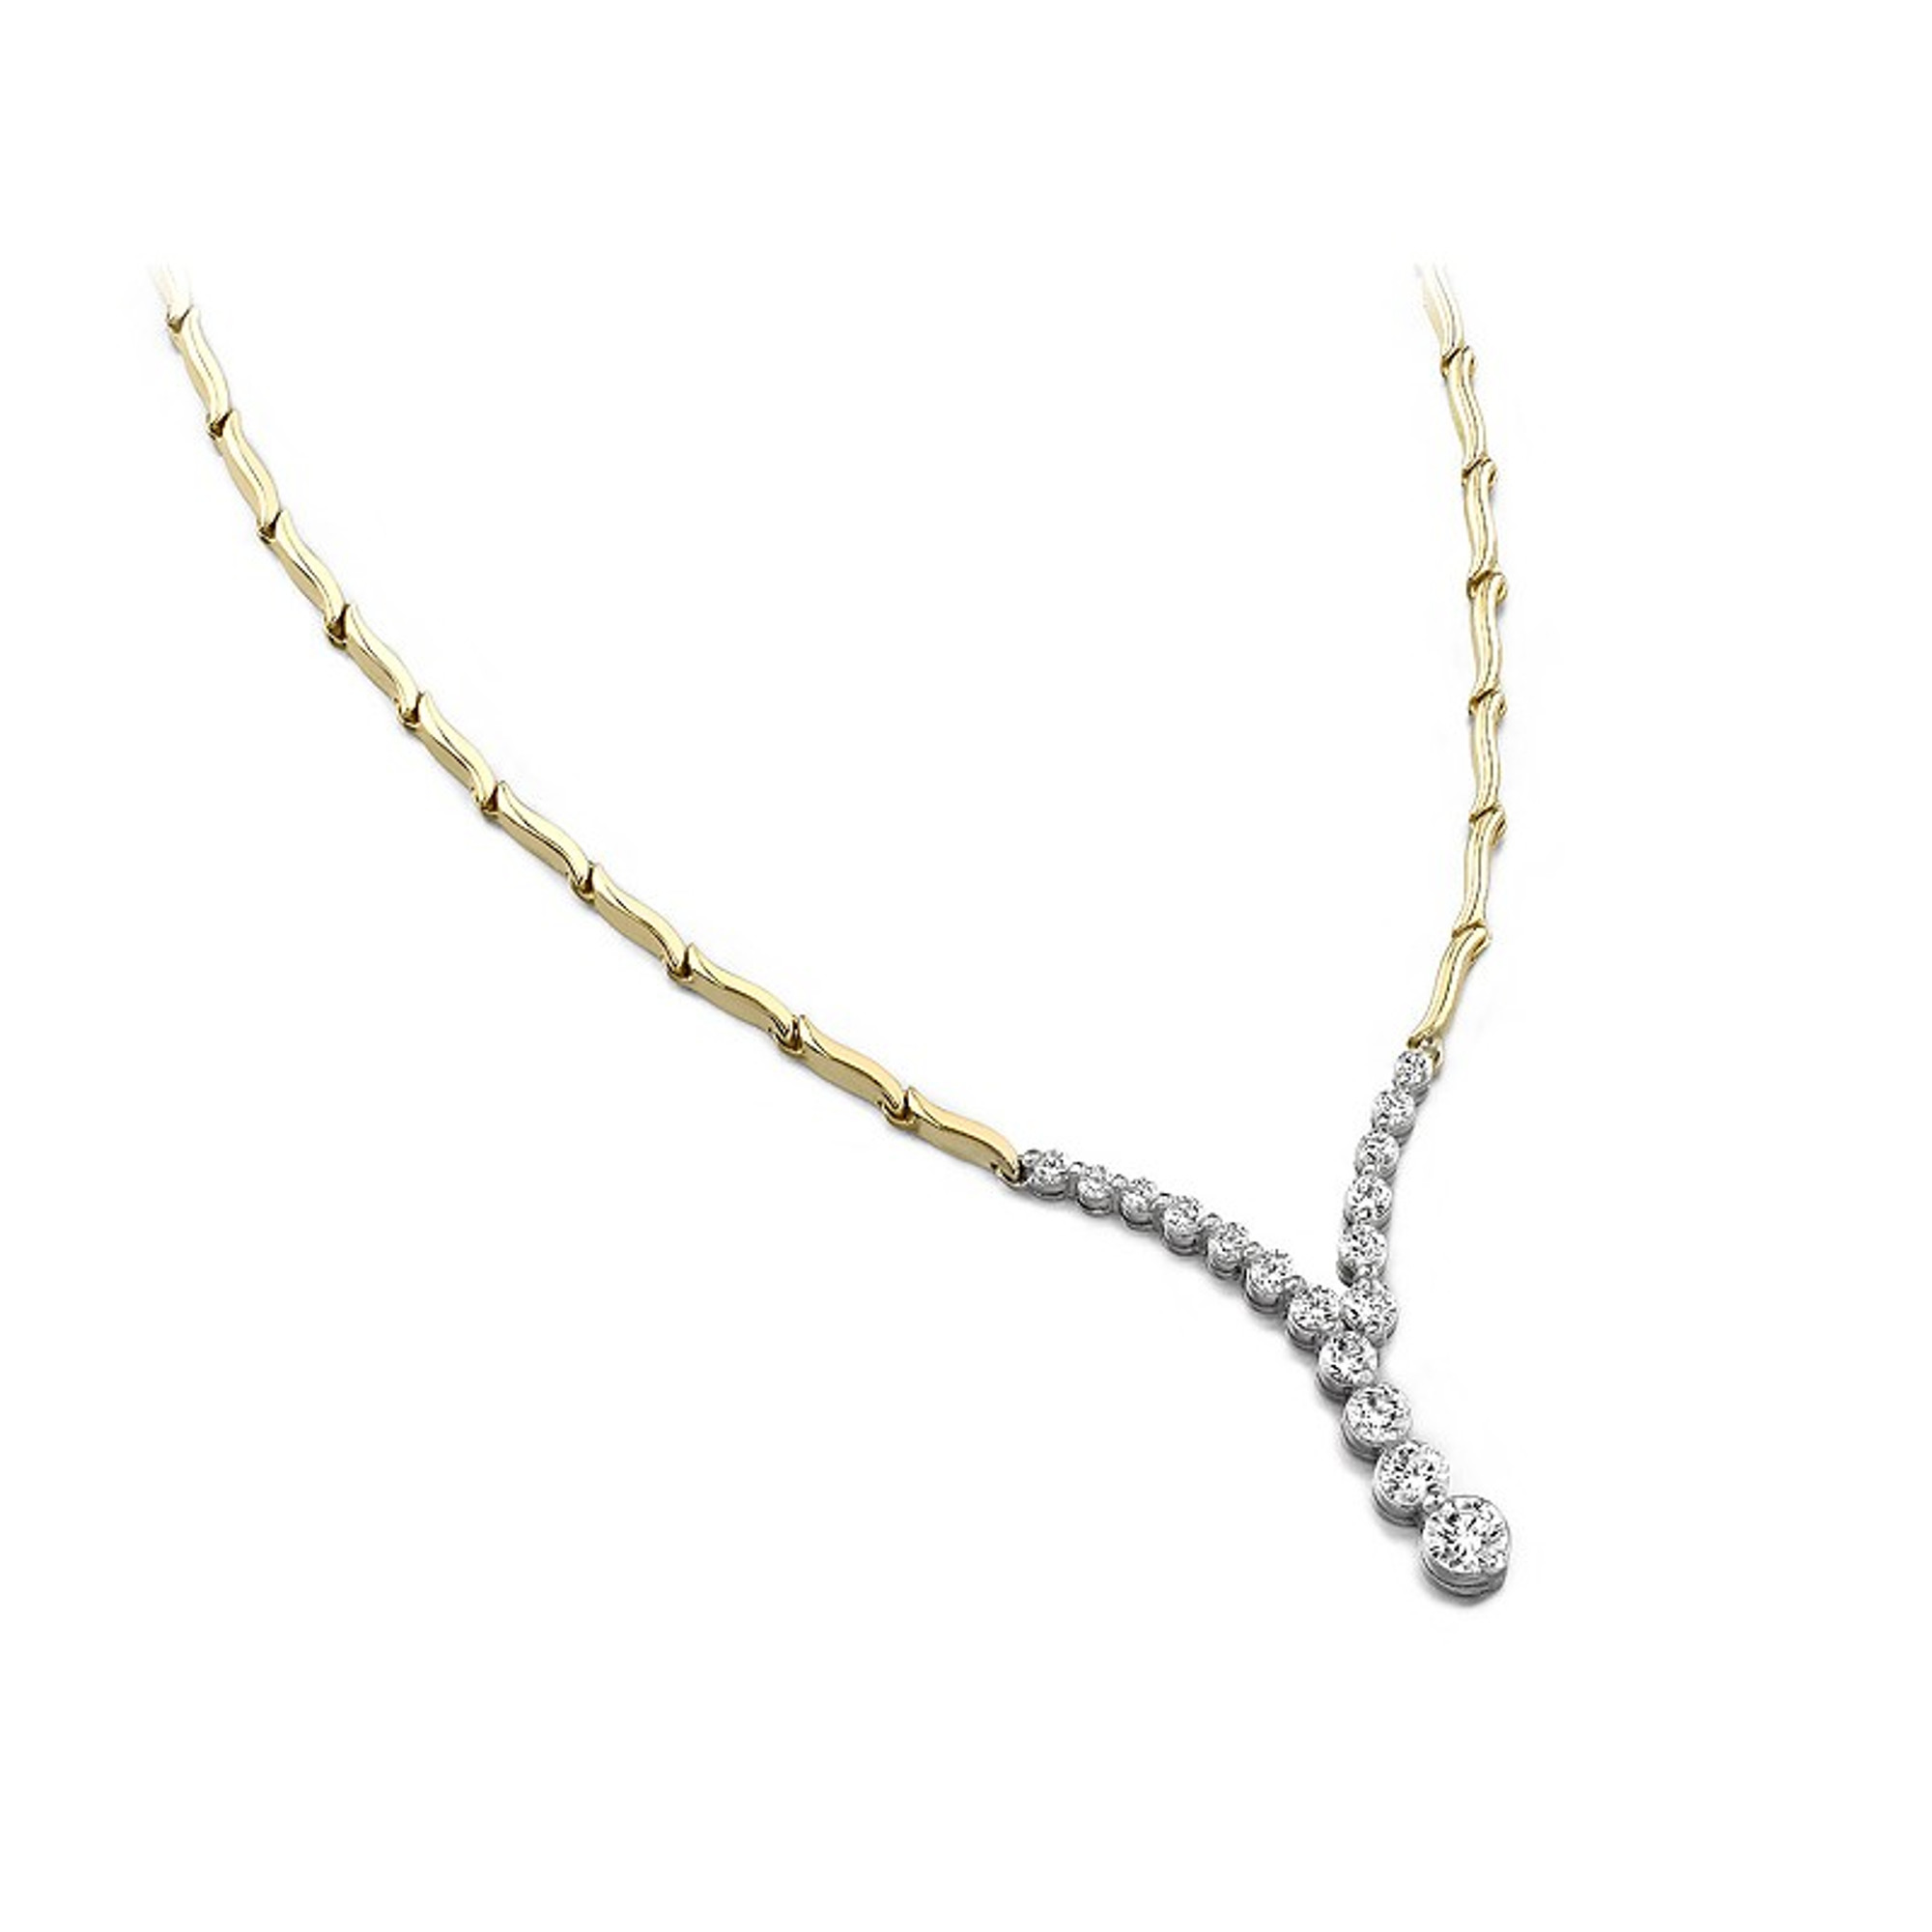 Men's Link Necklace in Polished Two-Tone Stainless Steel - 24